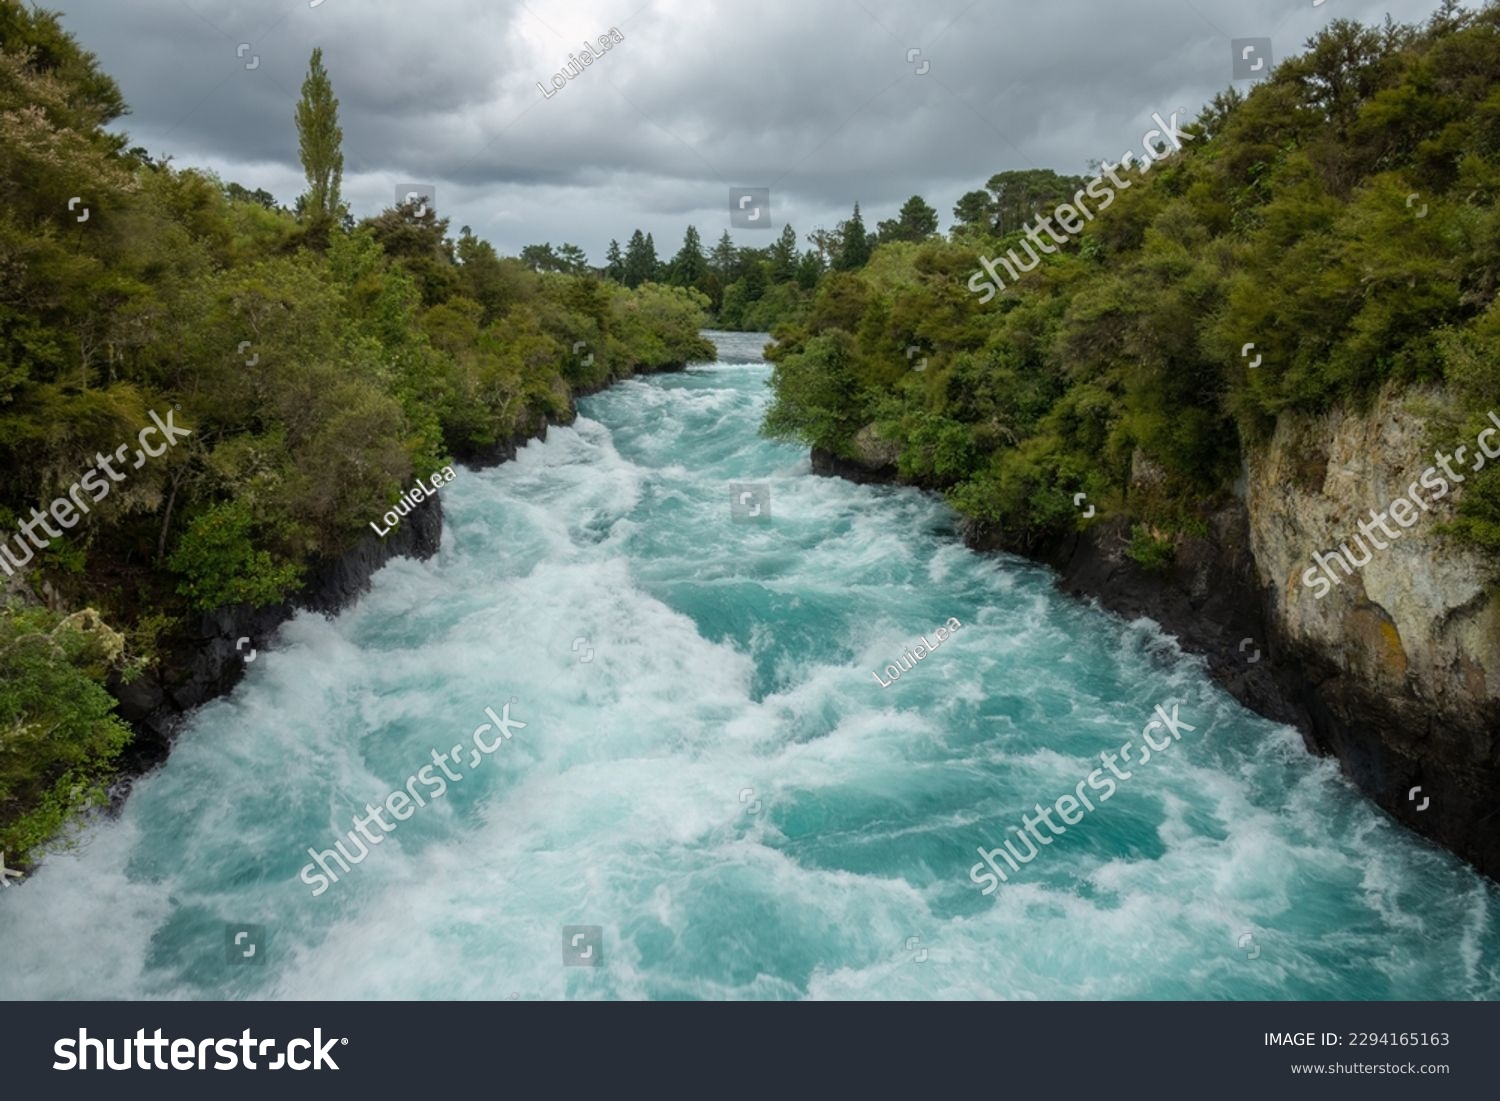 Huka Falls, a set of waterfalls on the Waikato River, which drains Lake Taupo in the North Island of New Zealand #2294165163